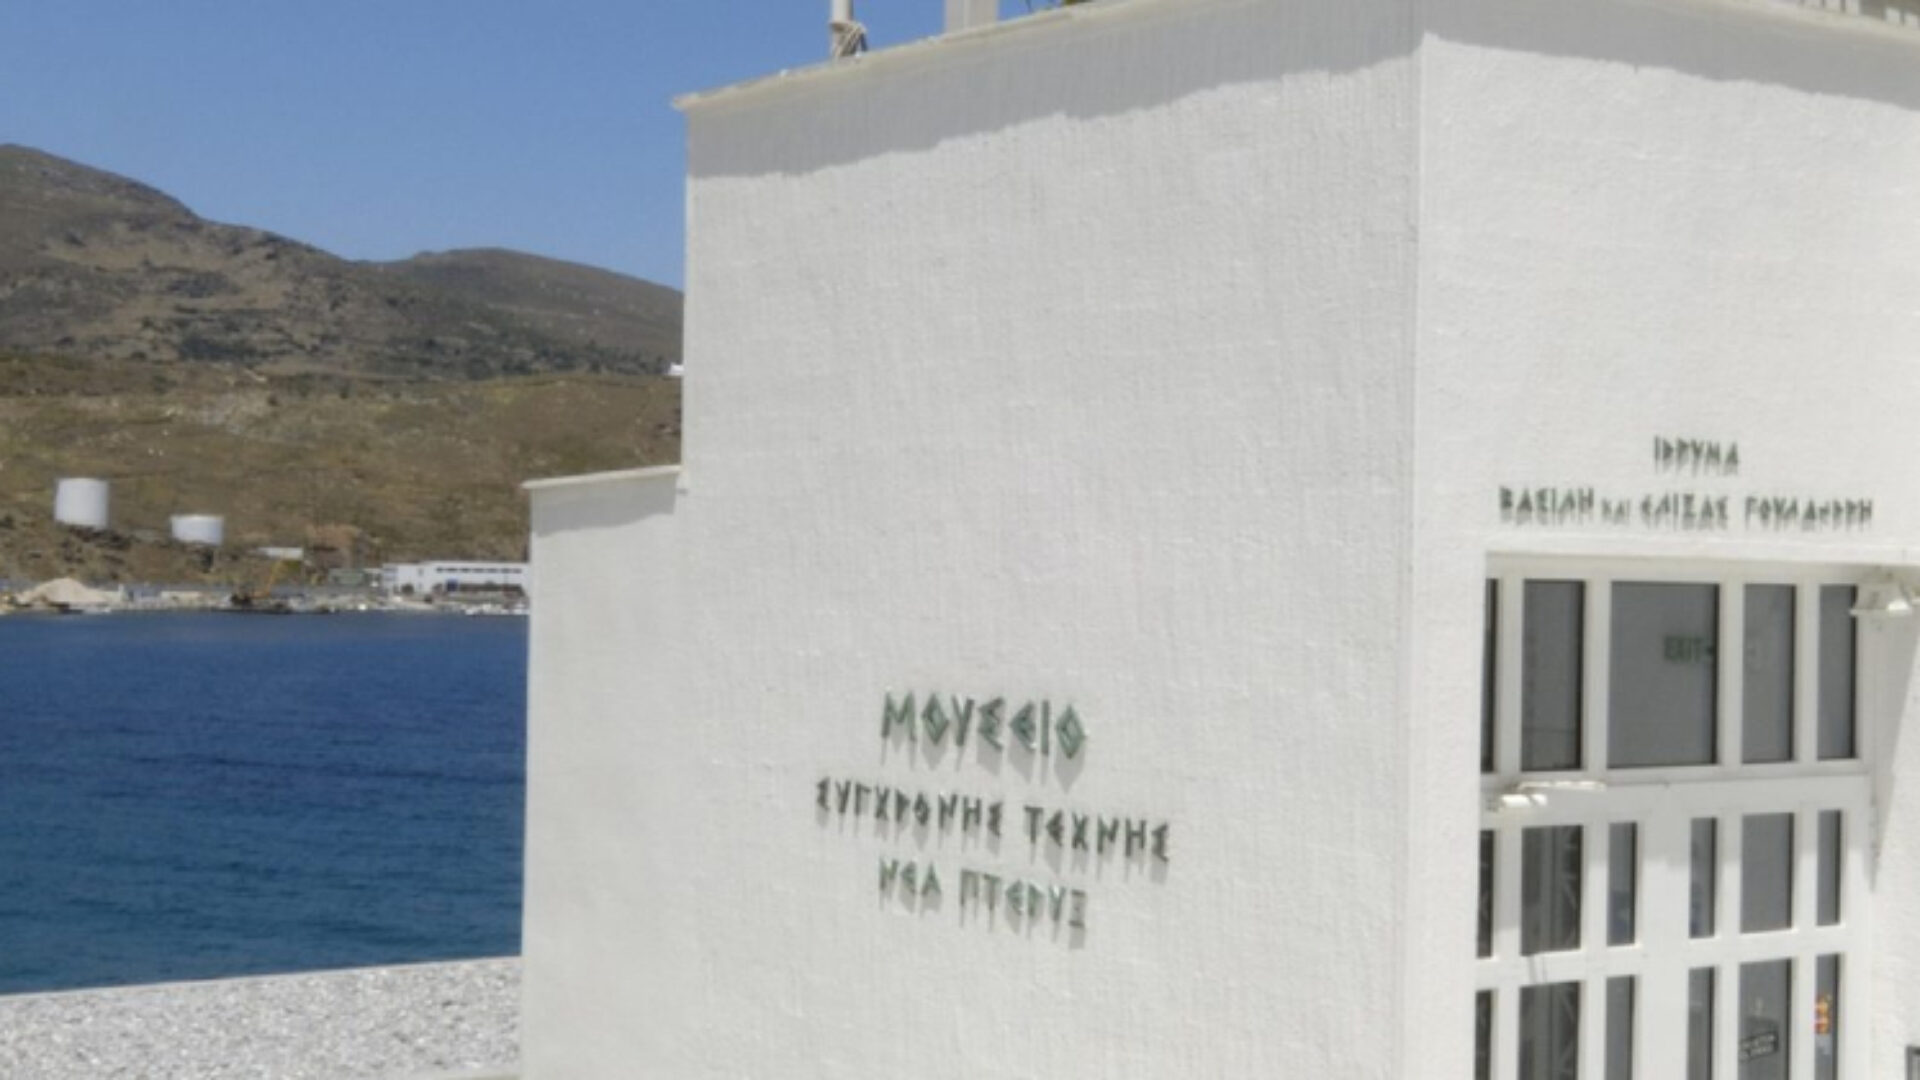 Andros-Visit-Cover-Photo-pn06xexjoqlh60z5lfv8wohhmeqqgife2wg4poaoog